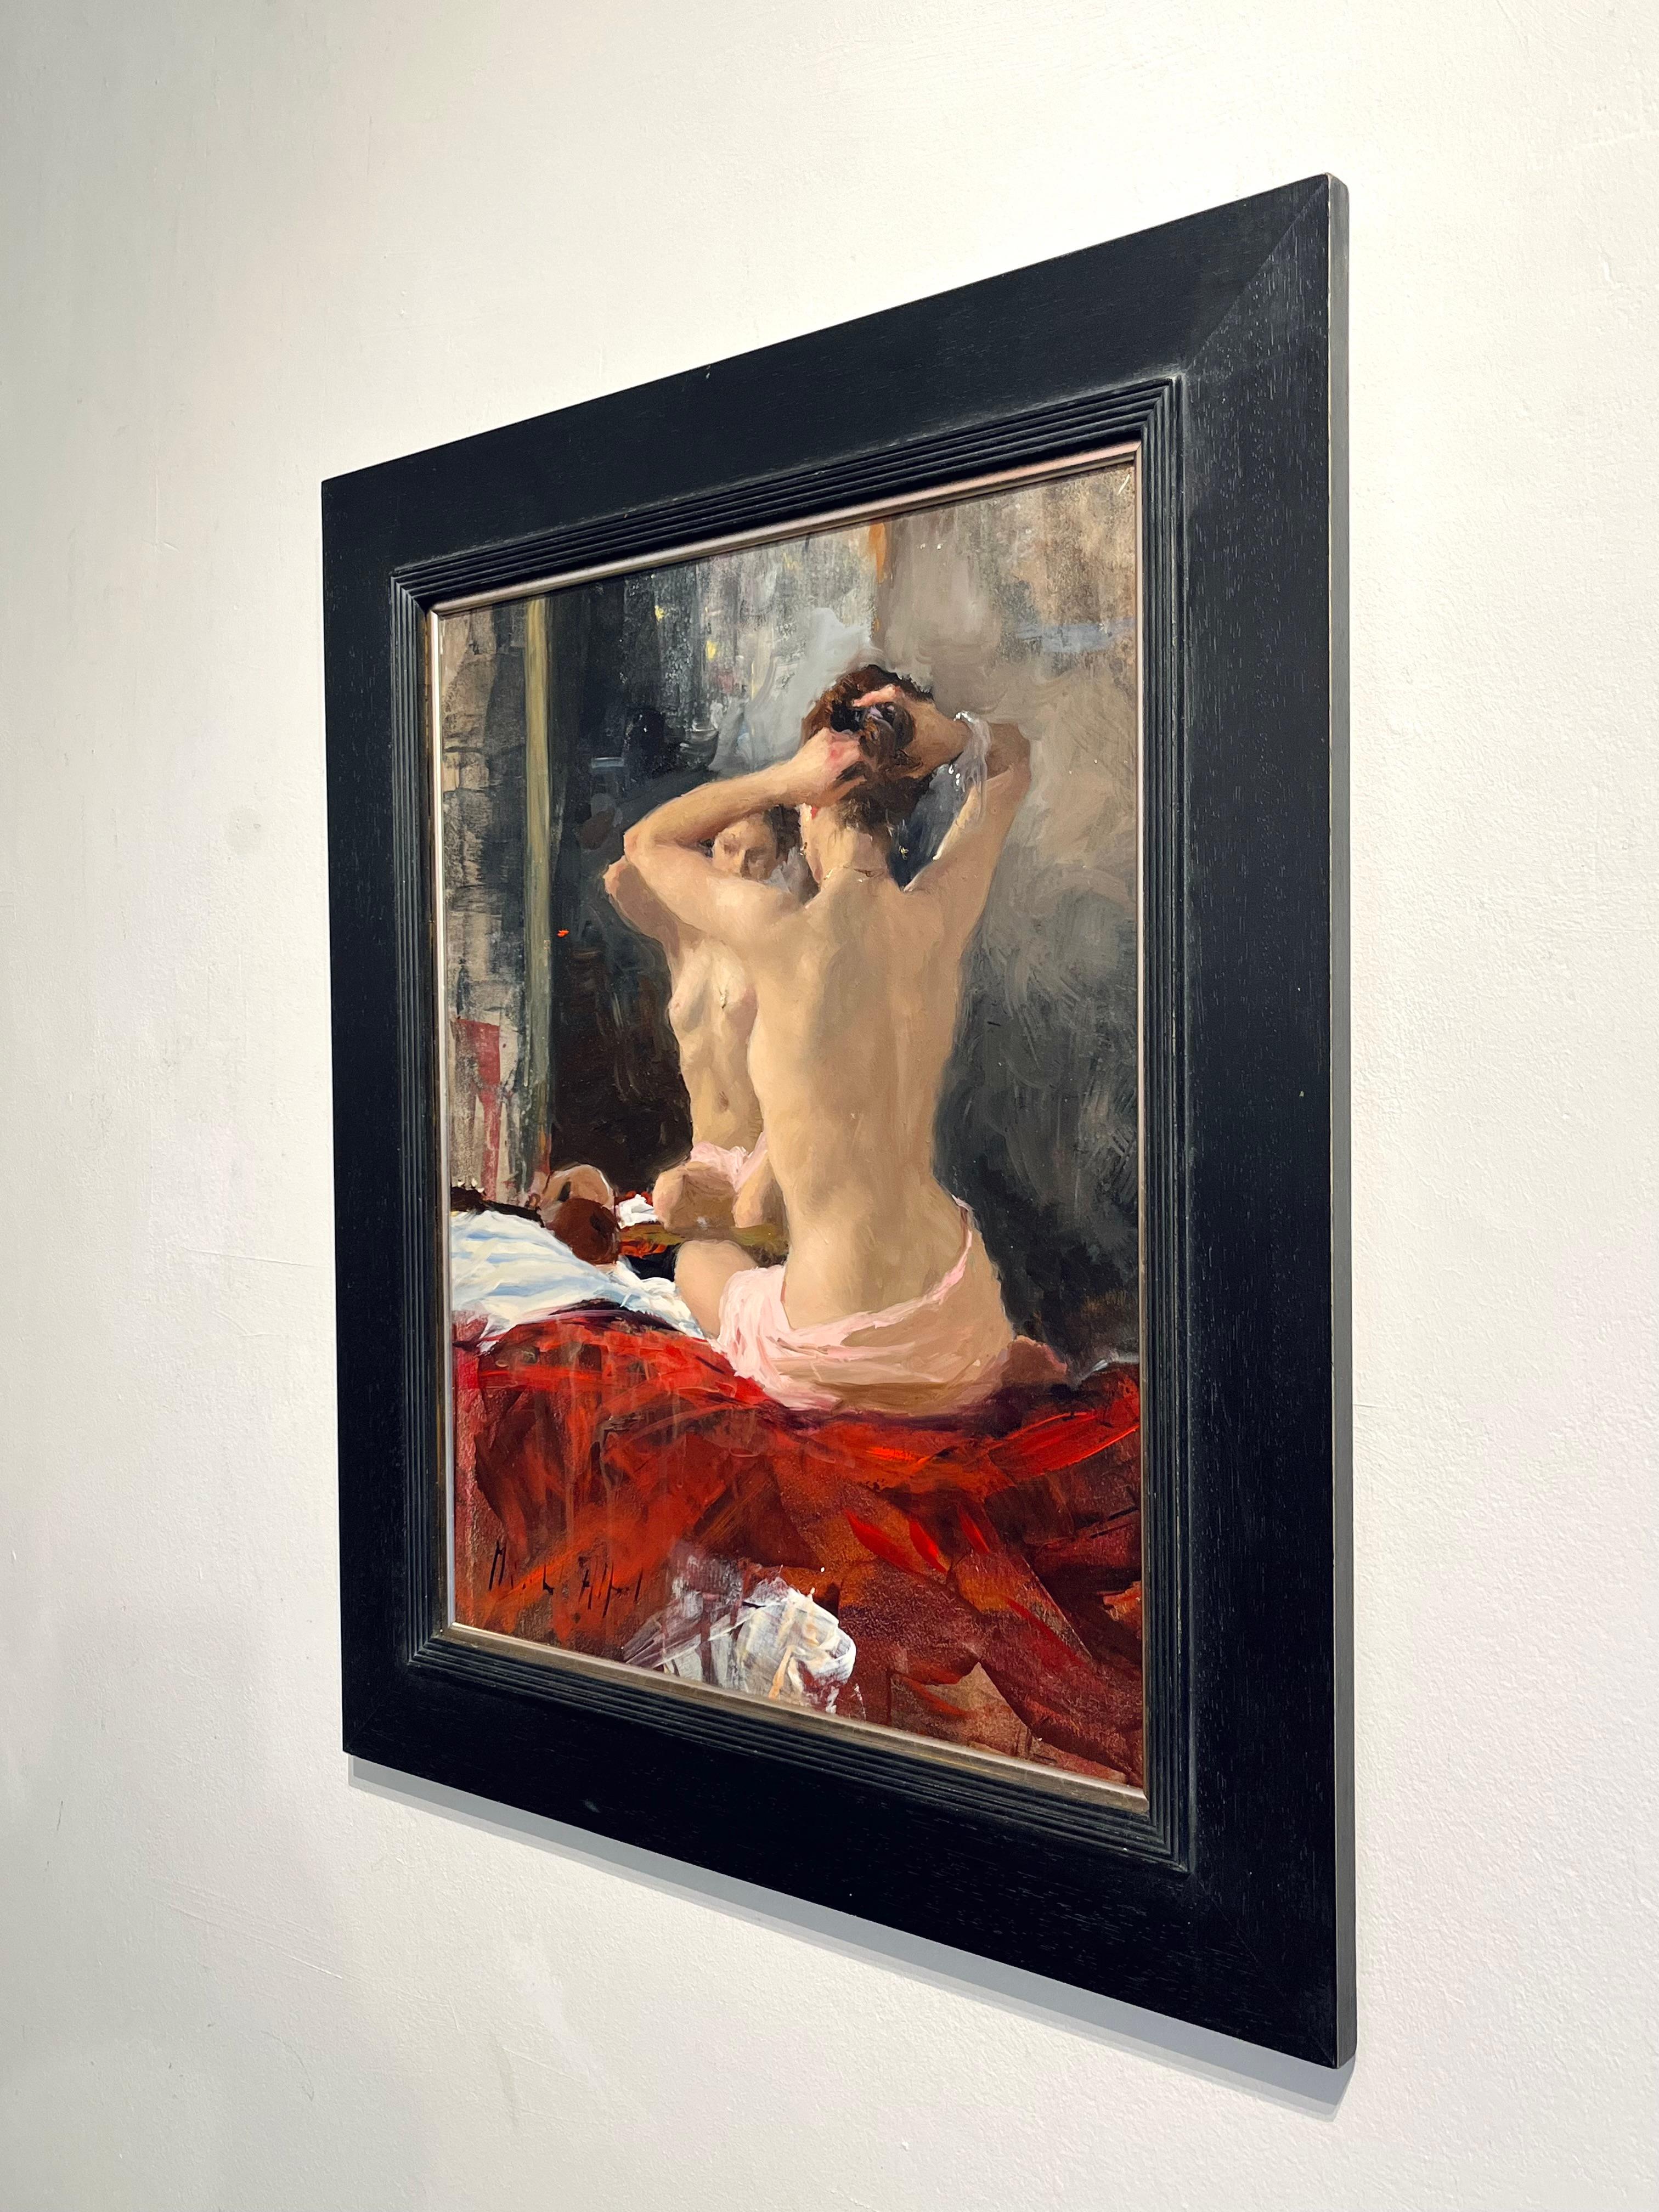 Nude, Reflection - original impressionist female figure study - contemporary art - Impressionist Painting by Michael Alford